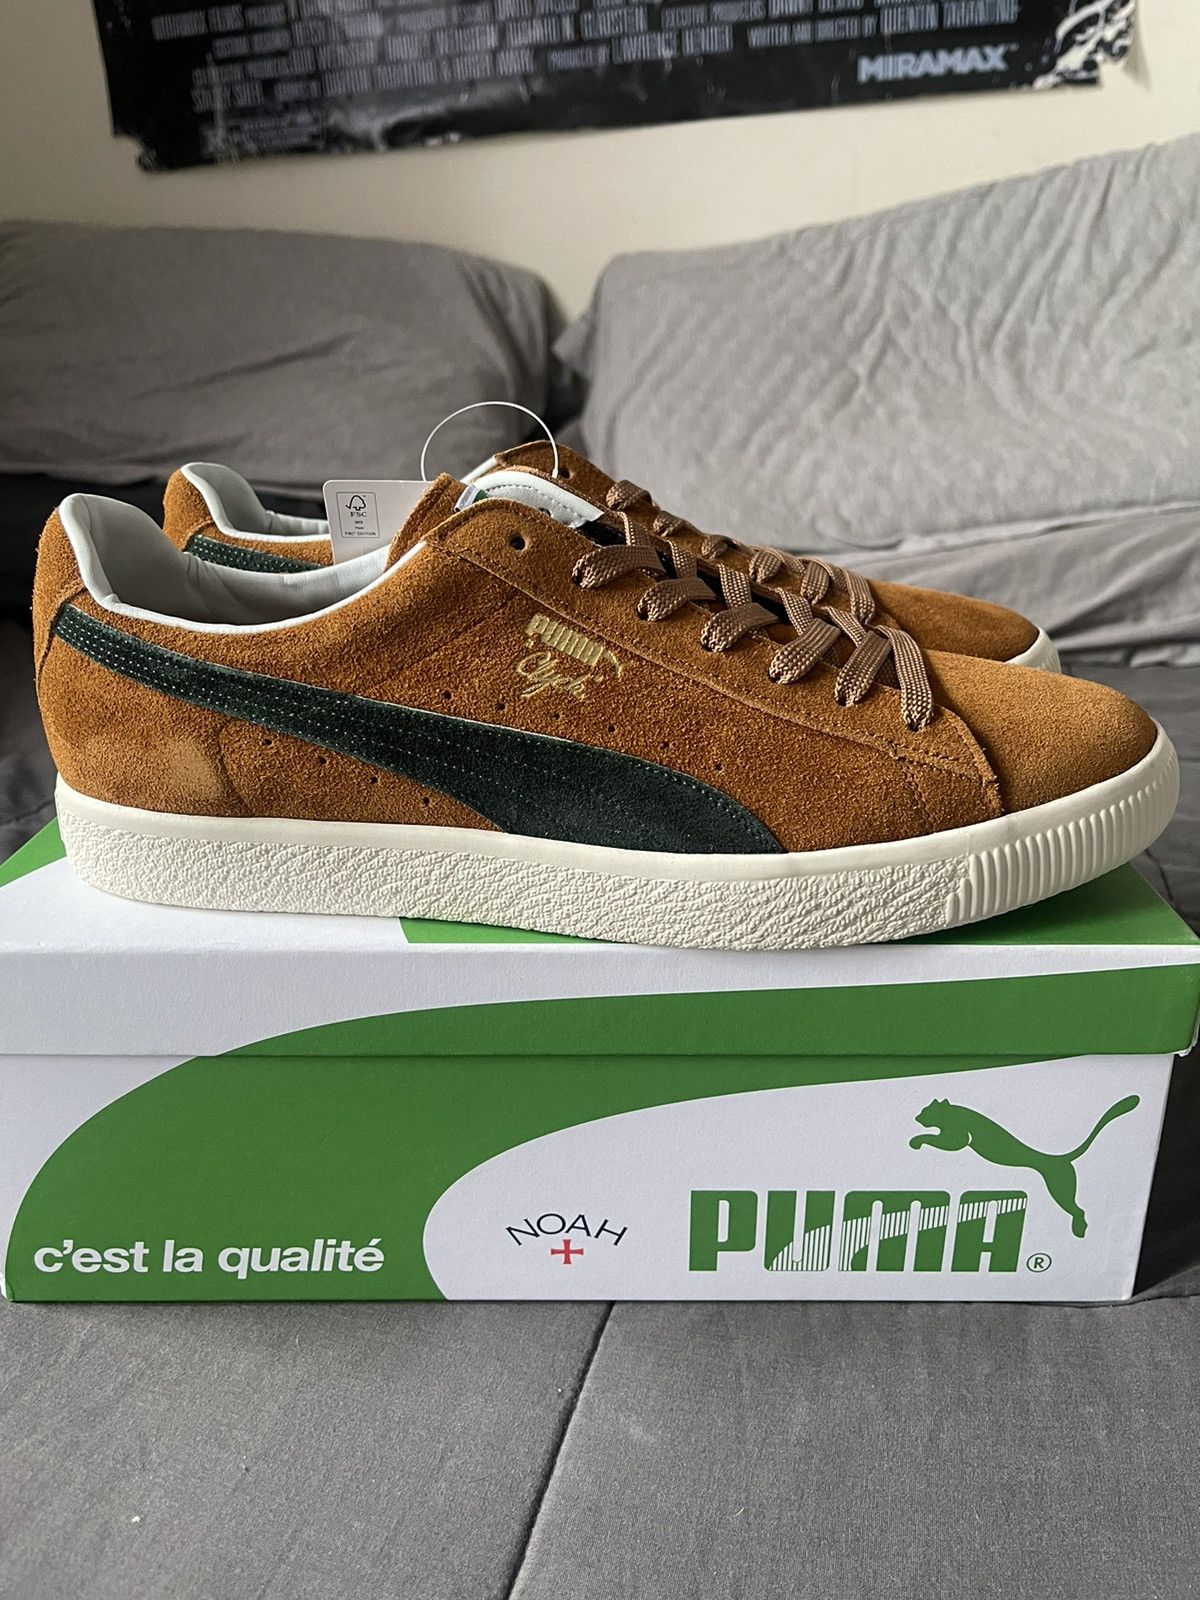 NOAH x Made in Japan PUMA Clyde Collection